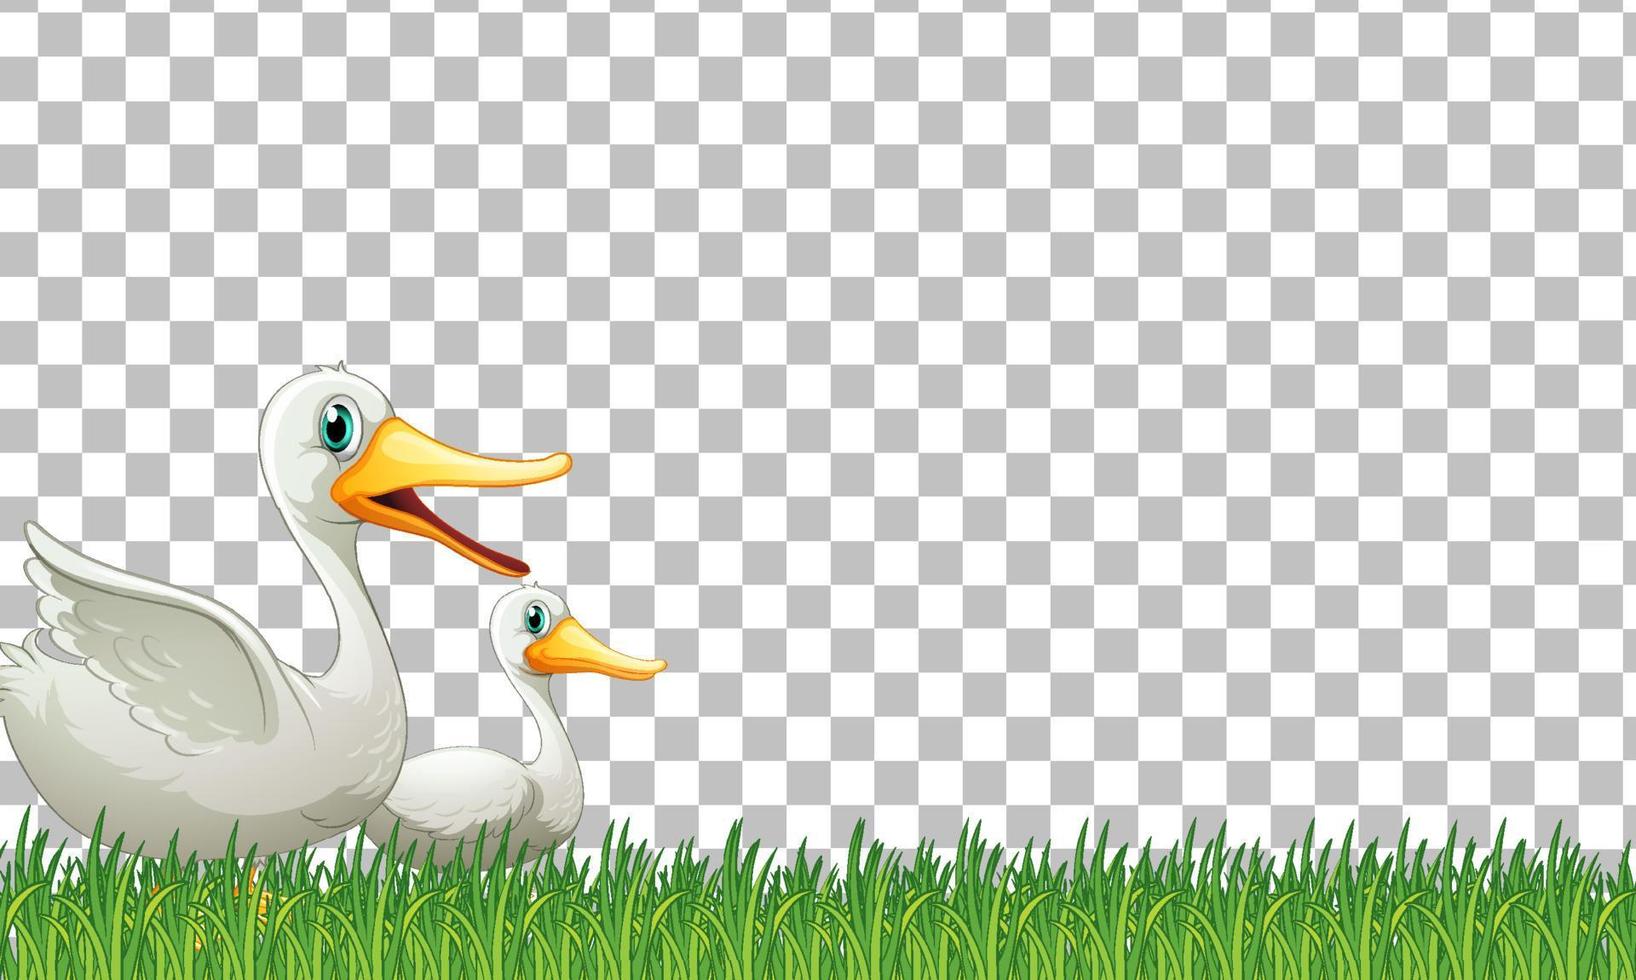 Duck and baby on grid background vector